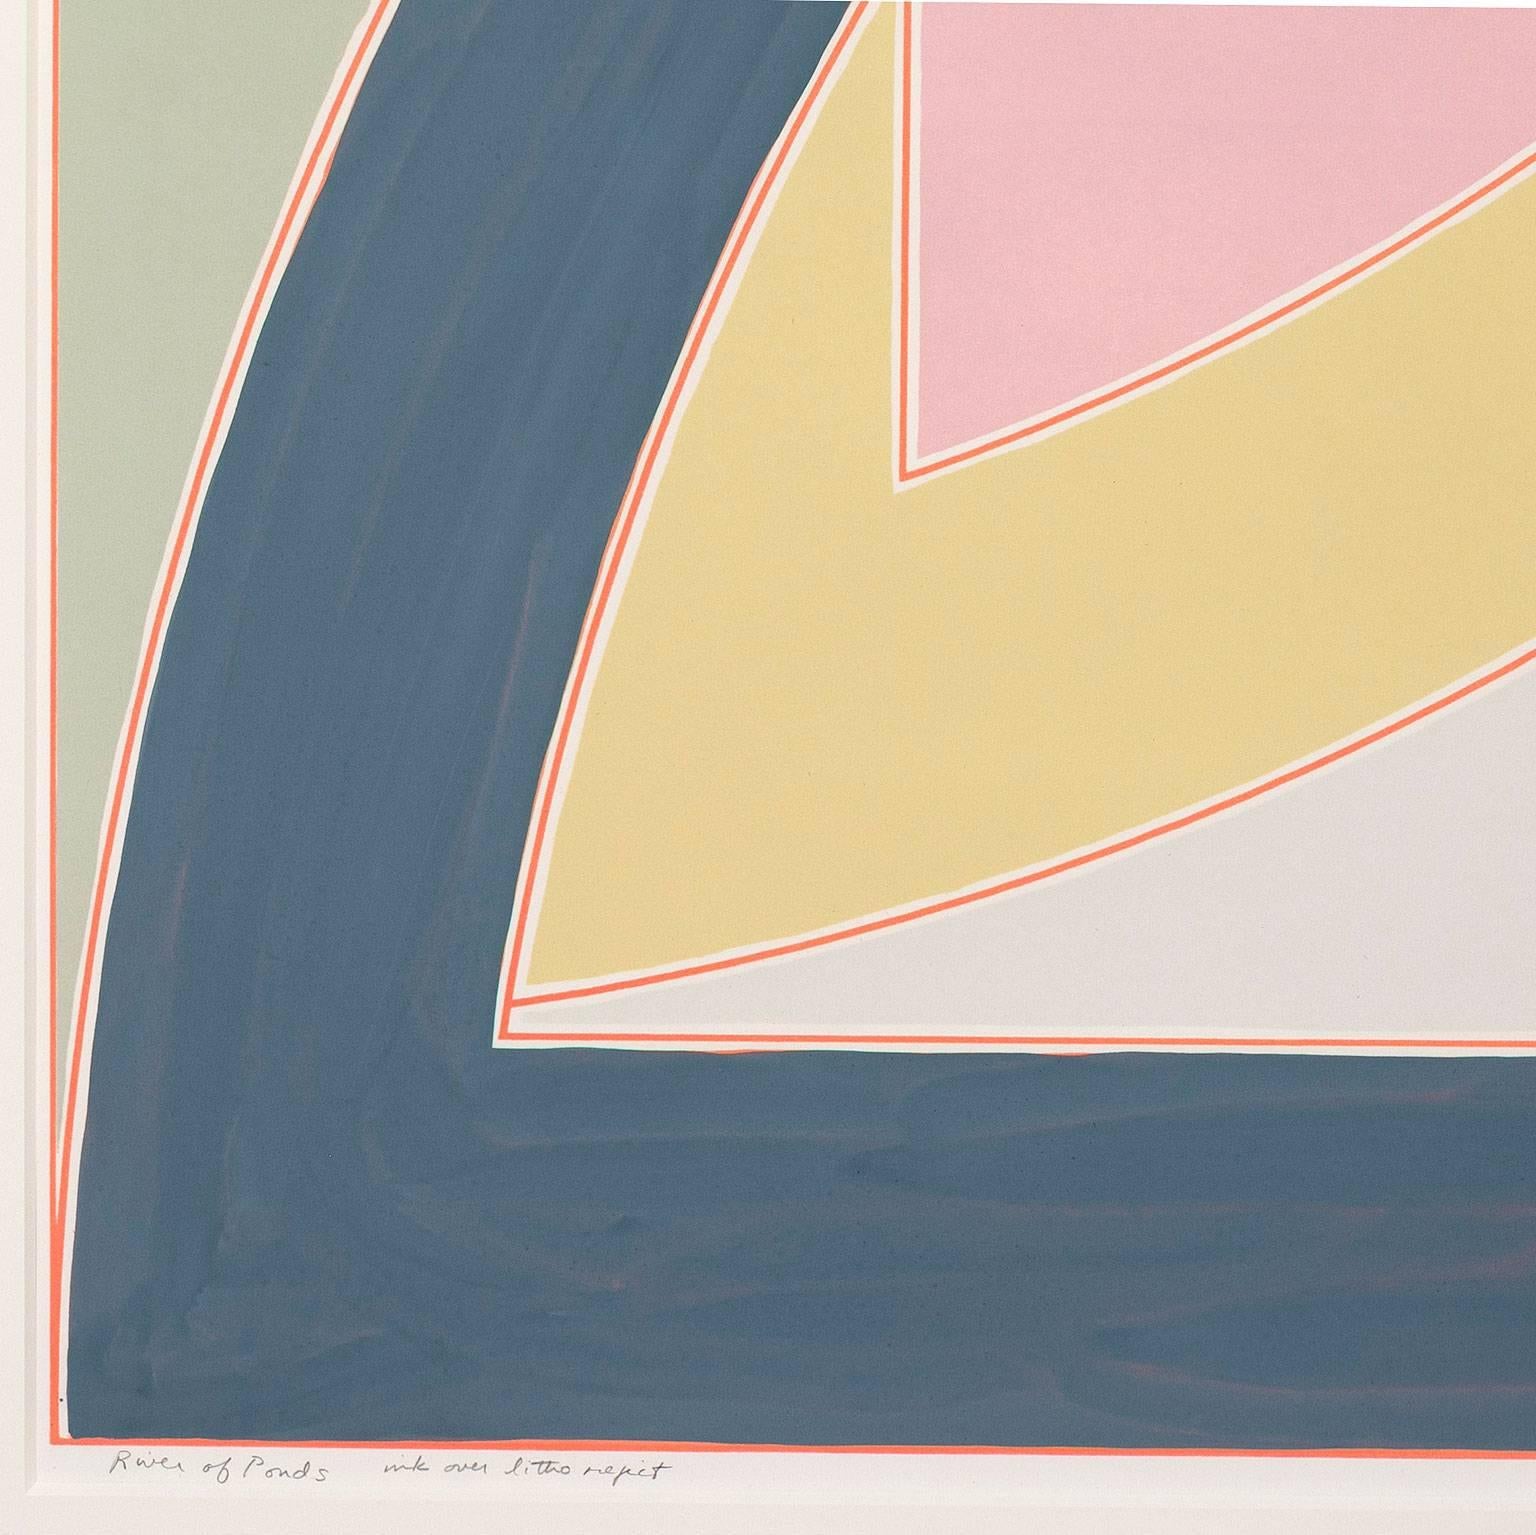 Over the past few years Caviar20 has specialized in Frank Stella prints, with an emphasis on his works from the 1960's and 70's. 

One of the most interesting commercial decisions Stella made regarding his printmaking was to release the variations,